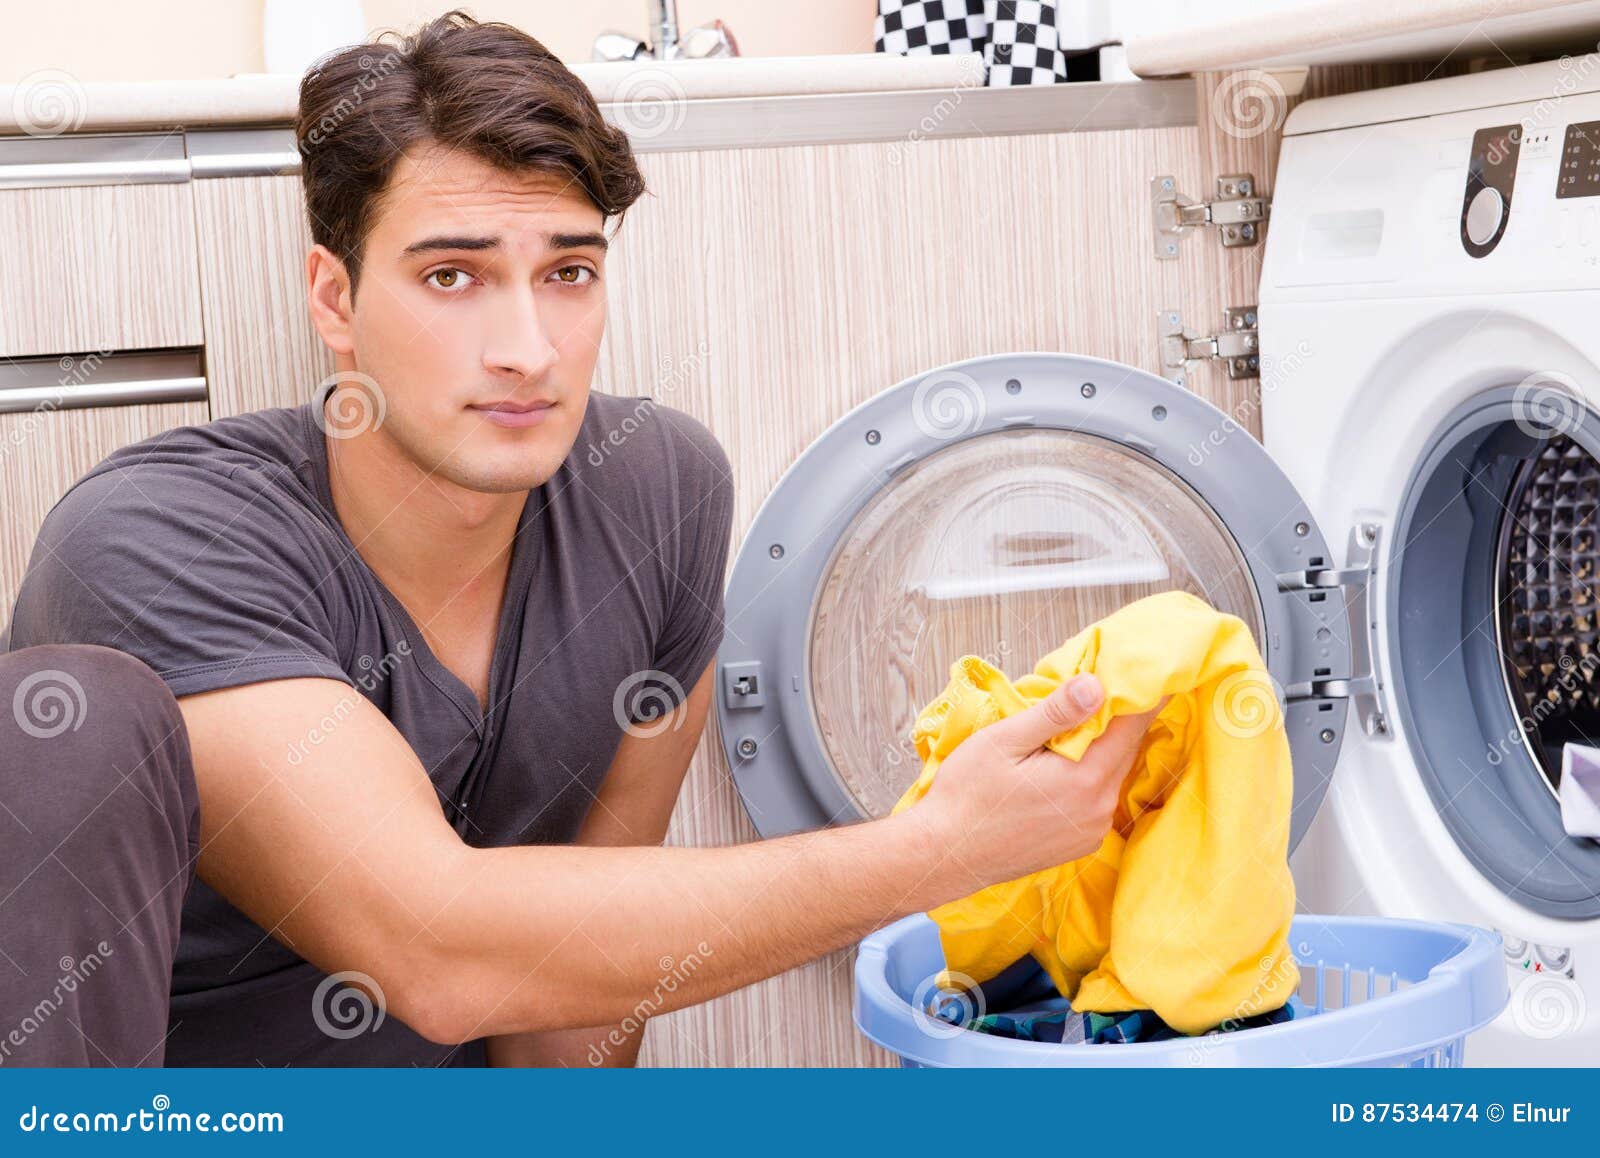 Did the laundry. Husband does Laundry. A worker at a Laundry man.